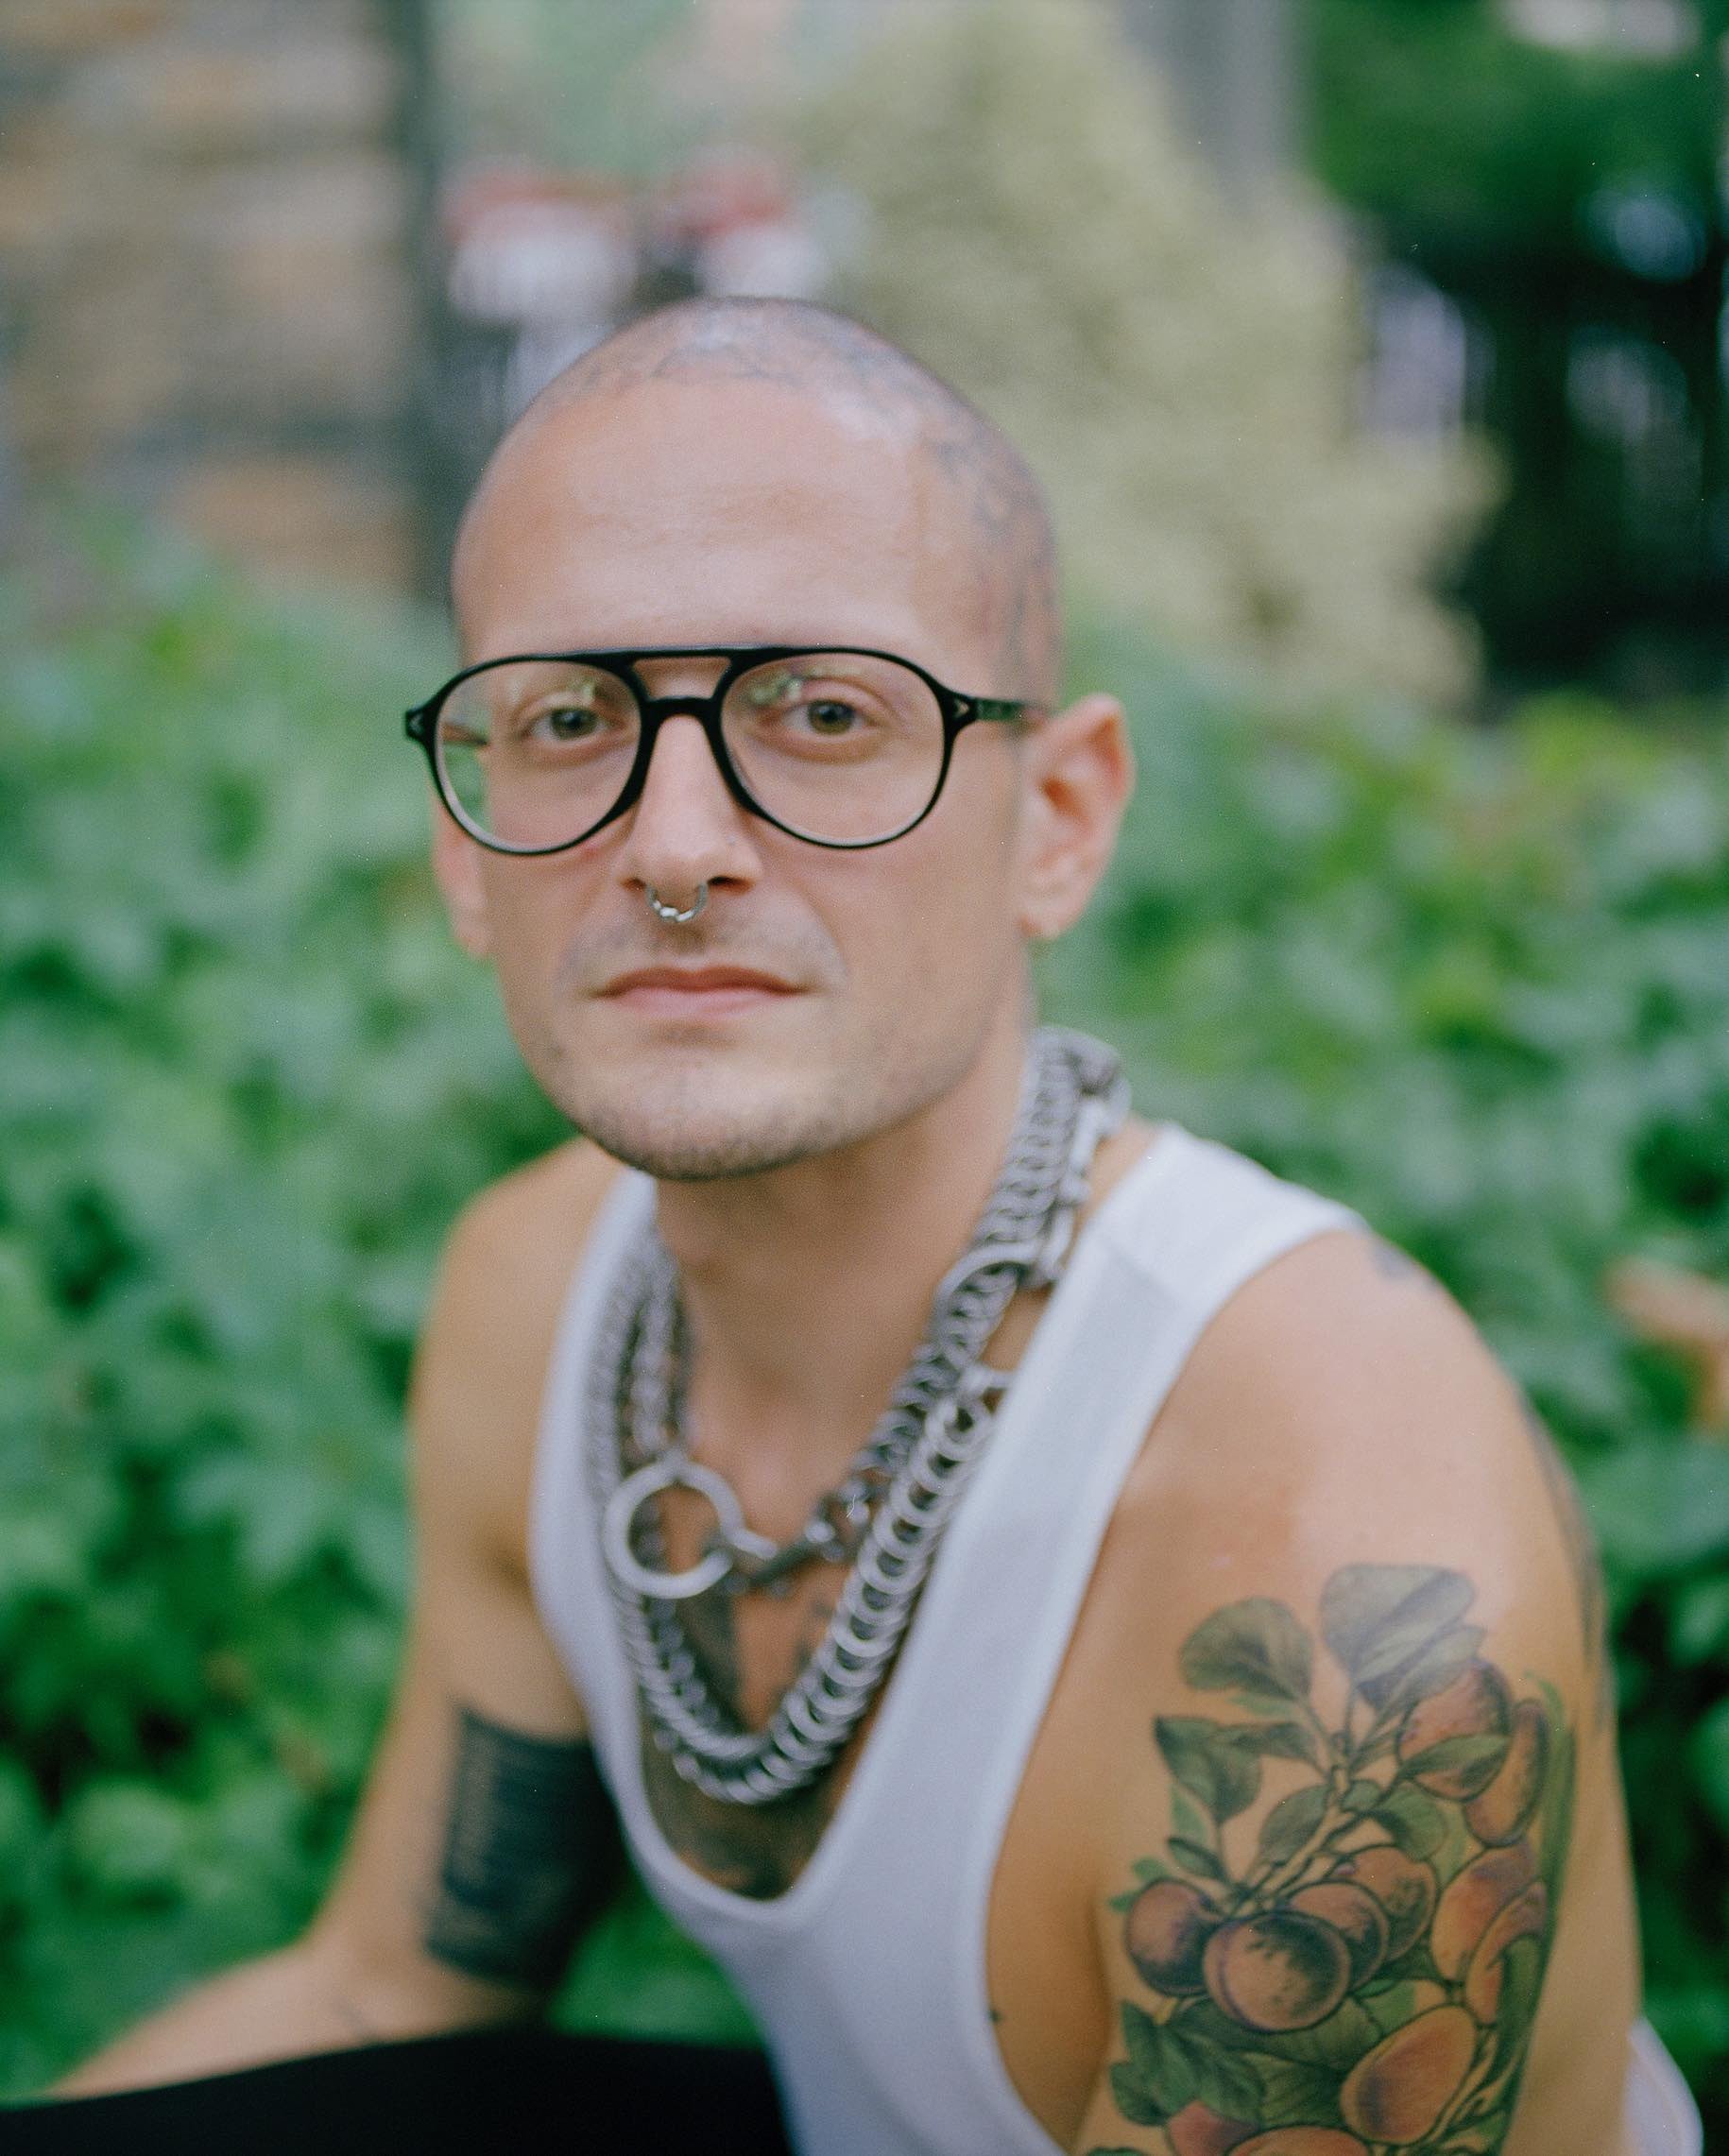 Will, a white nonbinary person with a shaved head, is shown in a portrait-oriented large-format film photograph cropped roughly from the chest up. They are facing the camera at a three-quarter angle. Will is wearing a loose white tank top, two heavy chain necklaces, heavy black enamel glasses in an aviator style. Their septum is pierced and they have a tattoo of a peony that covers their whole head. The depth of field in the photograph is focused tightly on Will so the background is blurry, but greenery is visible.